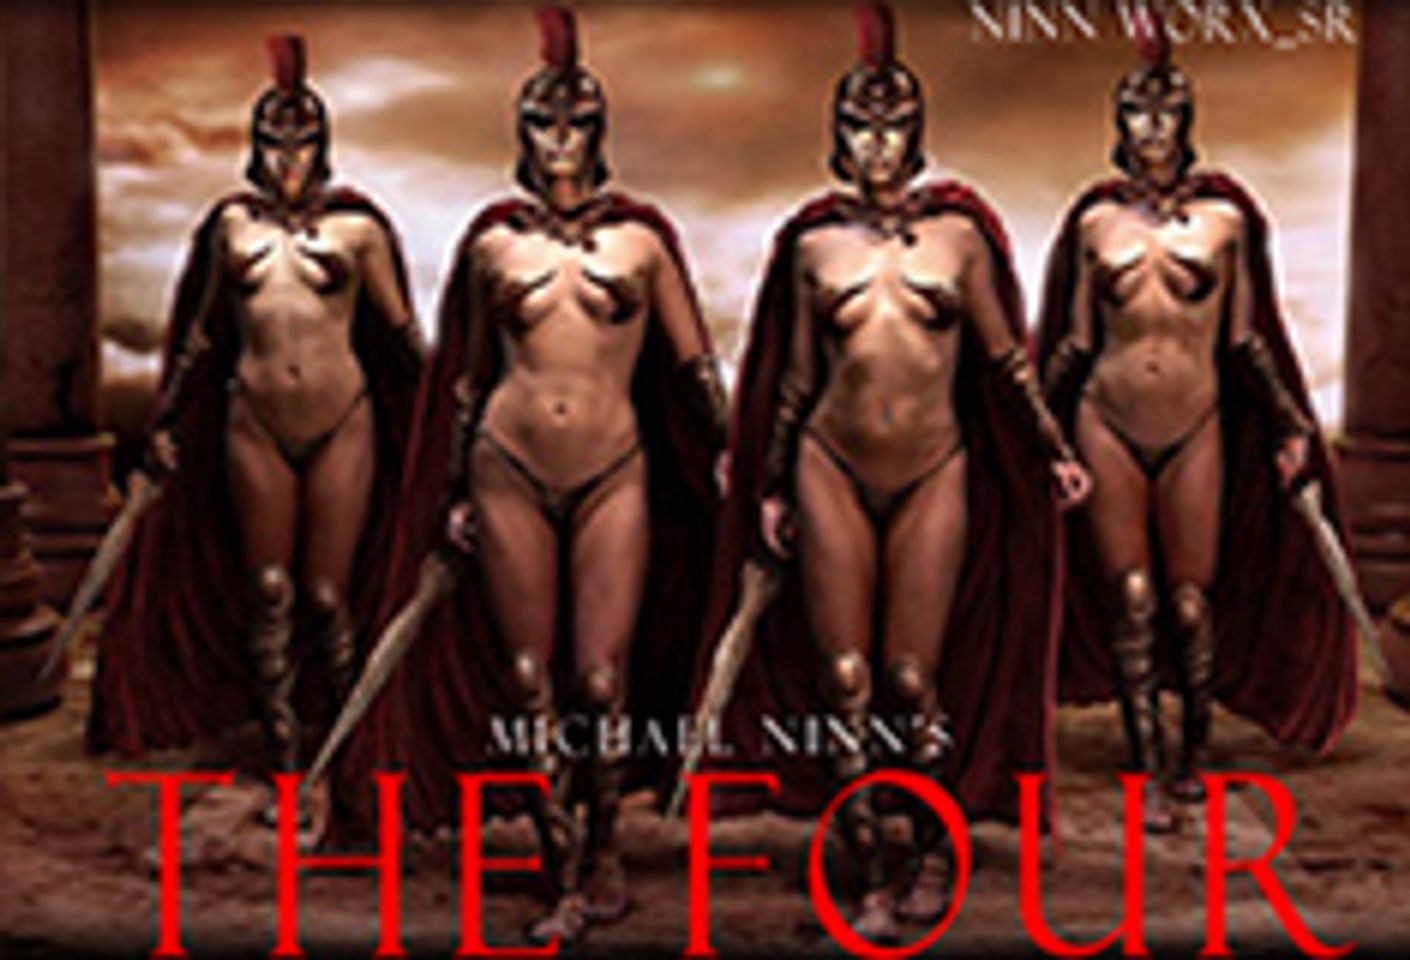 First Glimpse of Michael Ninn’s The Four Hits Internet